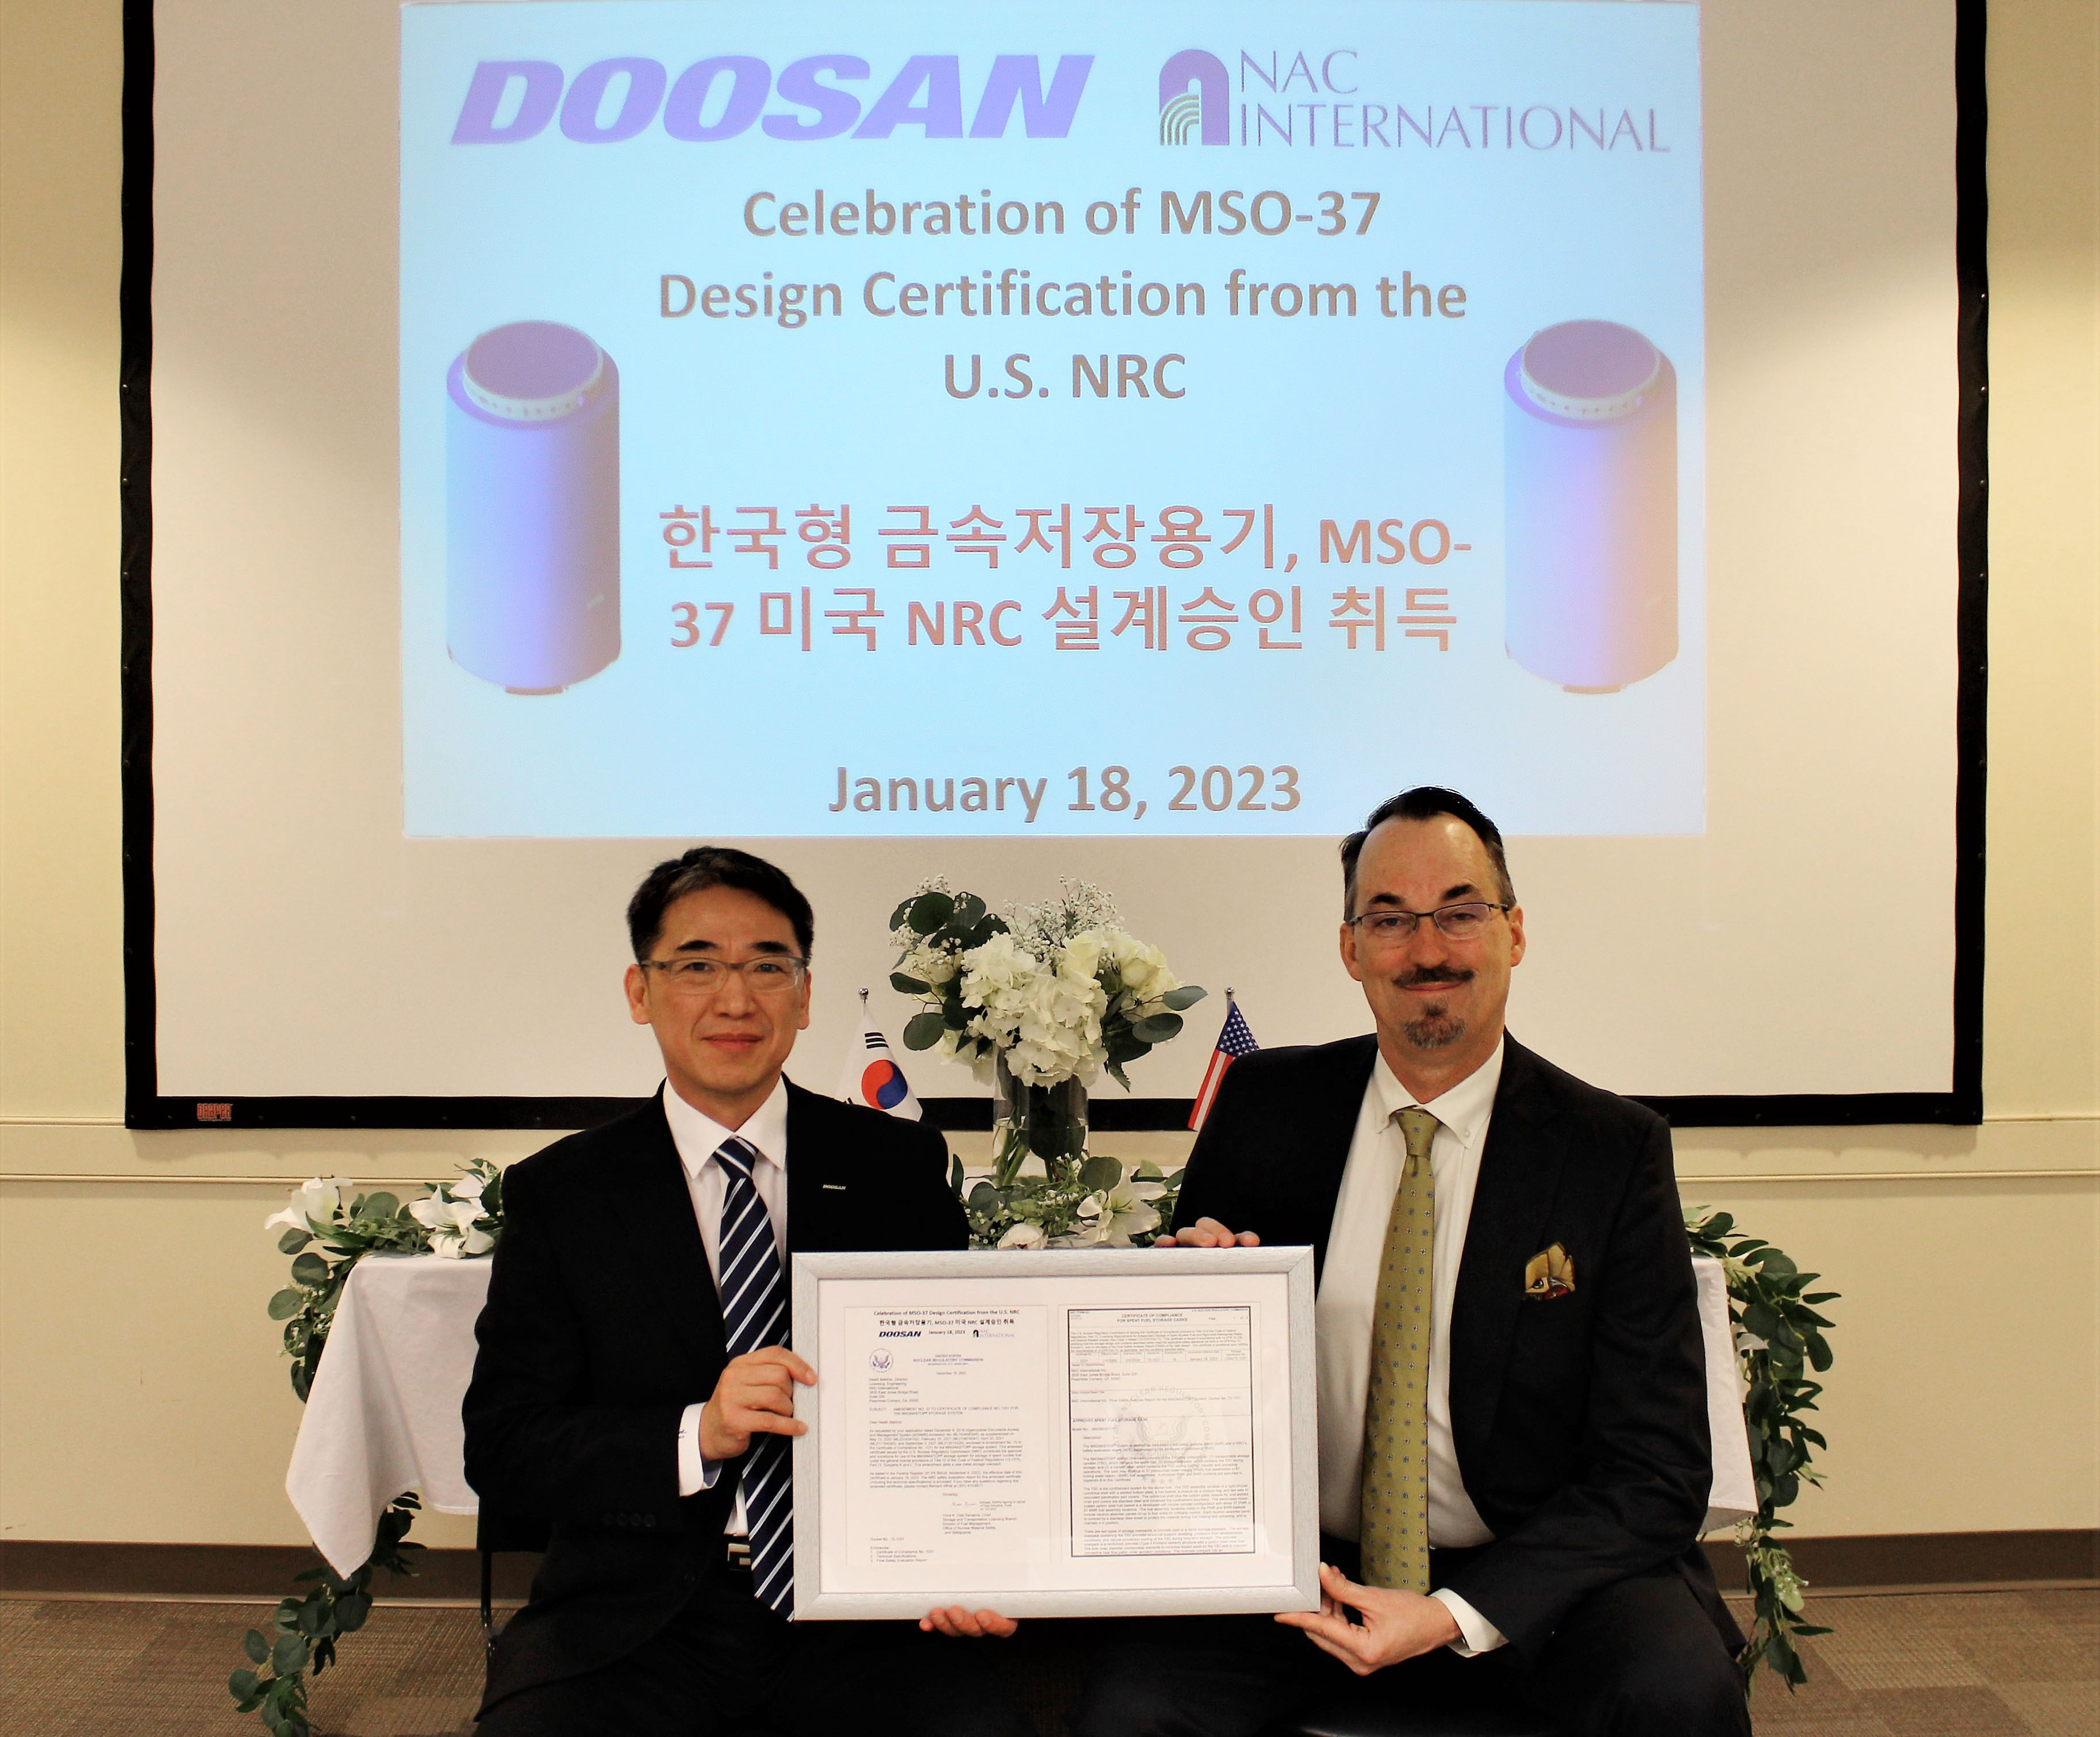 On Jan. 18th, Doosan Enerbility VP Changyeol Cho (left) and NAC President Kent Cole pose for a photo at the NAC headquarters located in Atlanta.